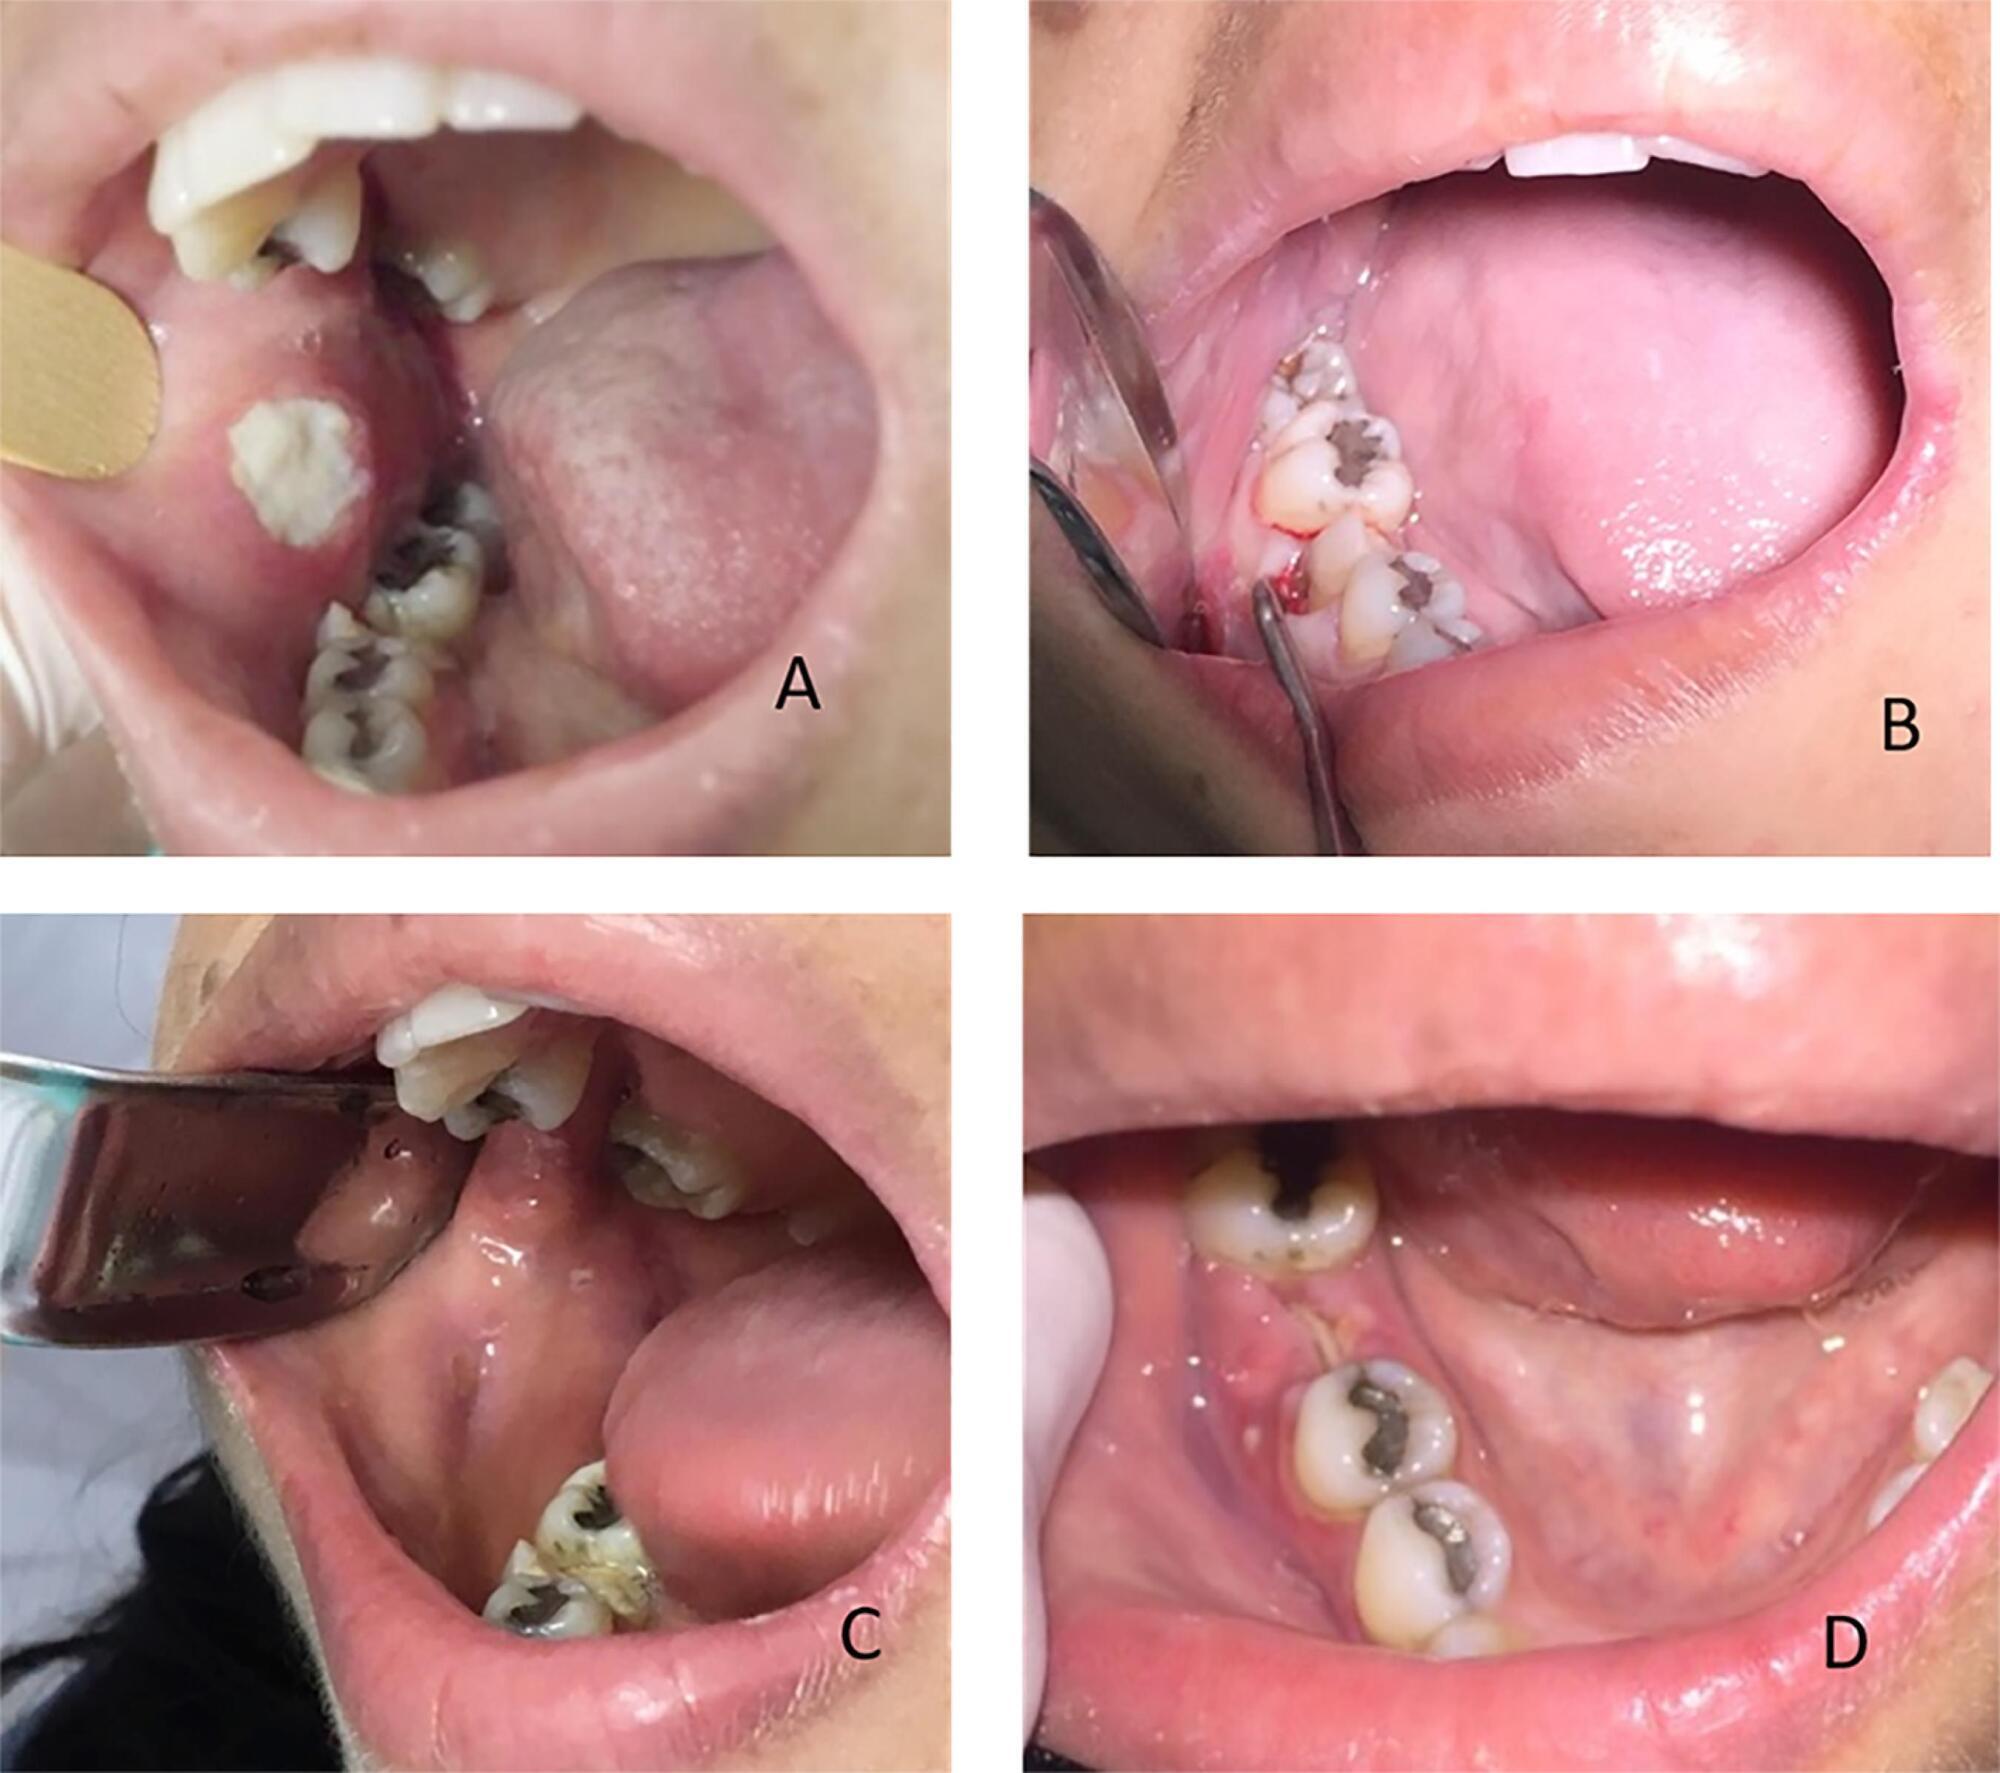 Extensive oral ulcer in a patient with lupus erythematosus